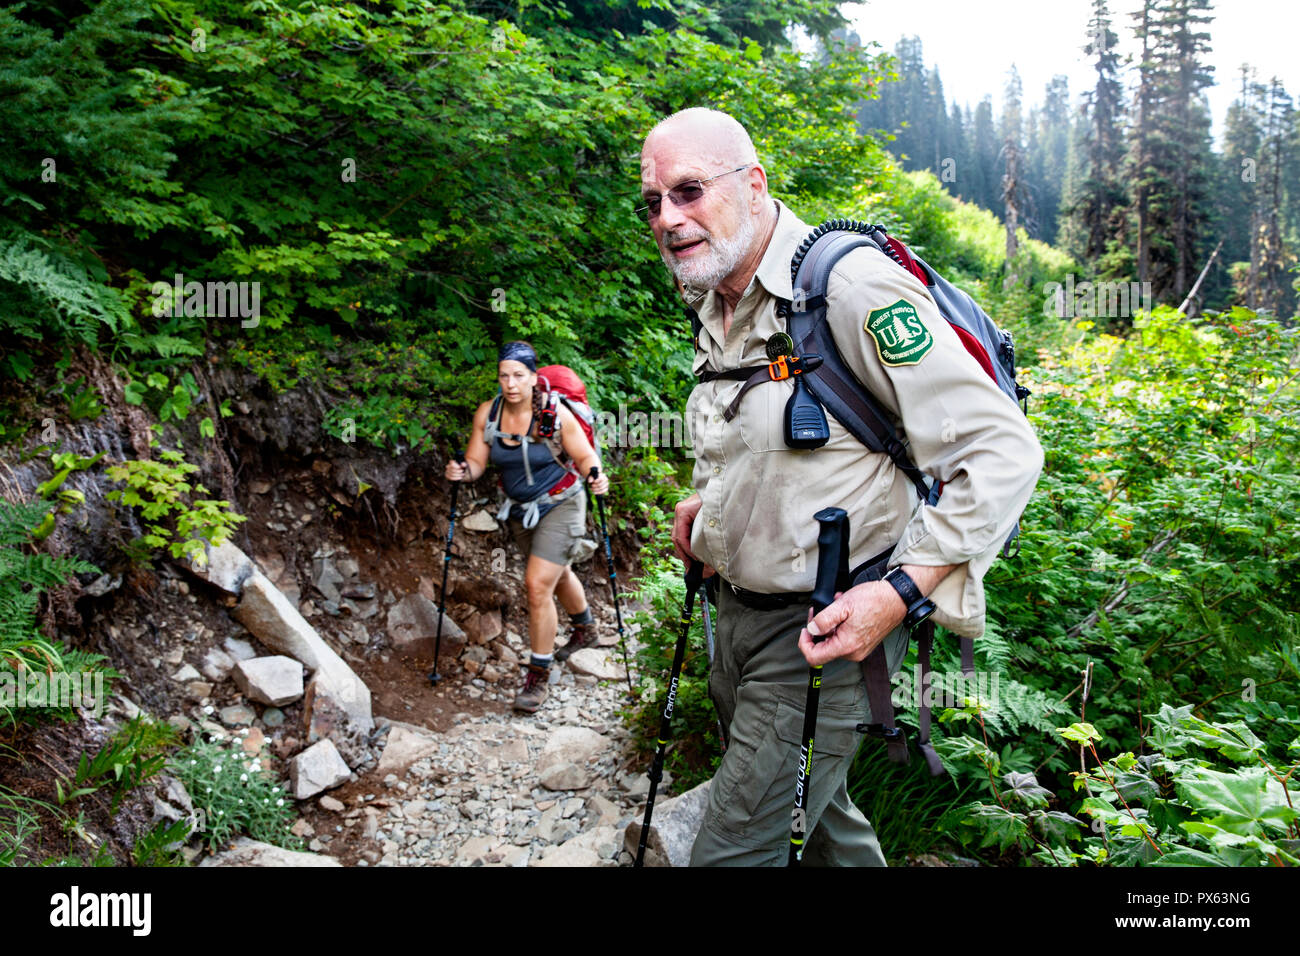 WA14850-00...WASHINGTON - Forest Service Volunteer John Spring on the Snow Lakes Trail in the Baker -Snoqualmie National Forest. (MR# S6) Stock Photo